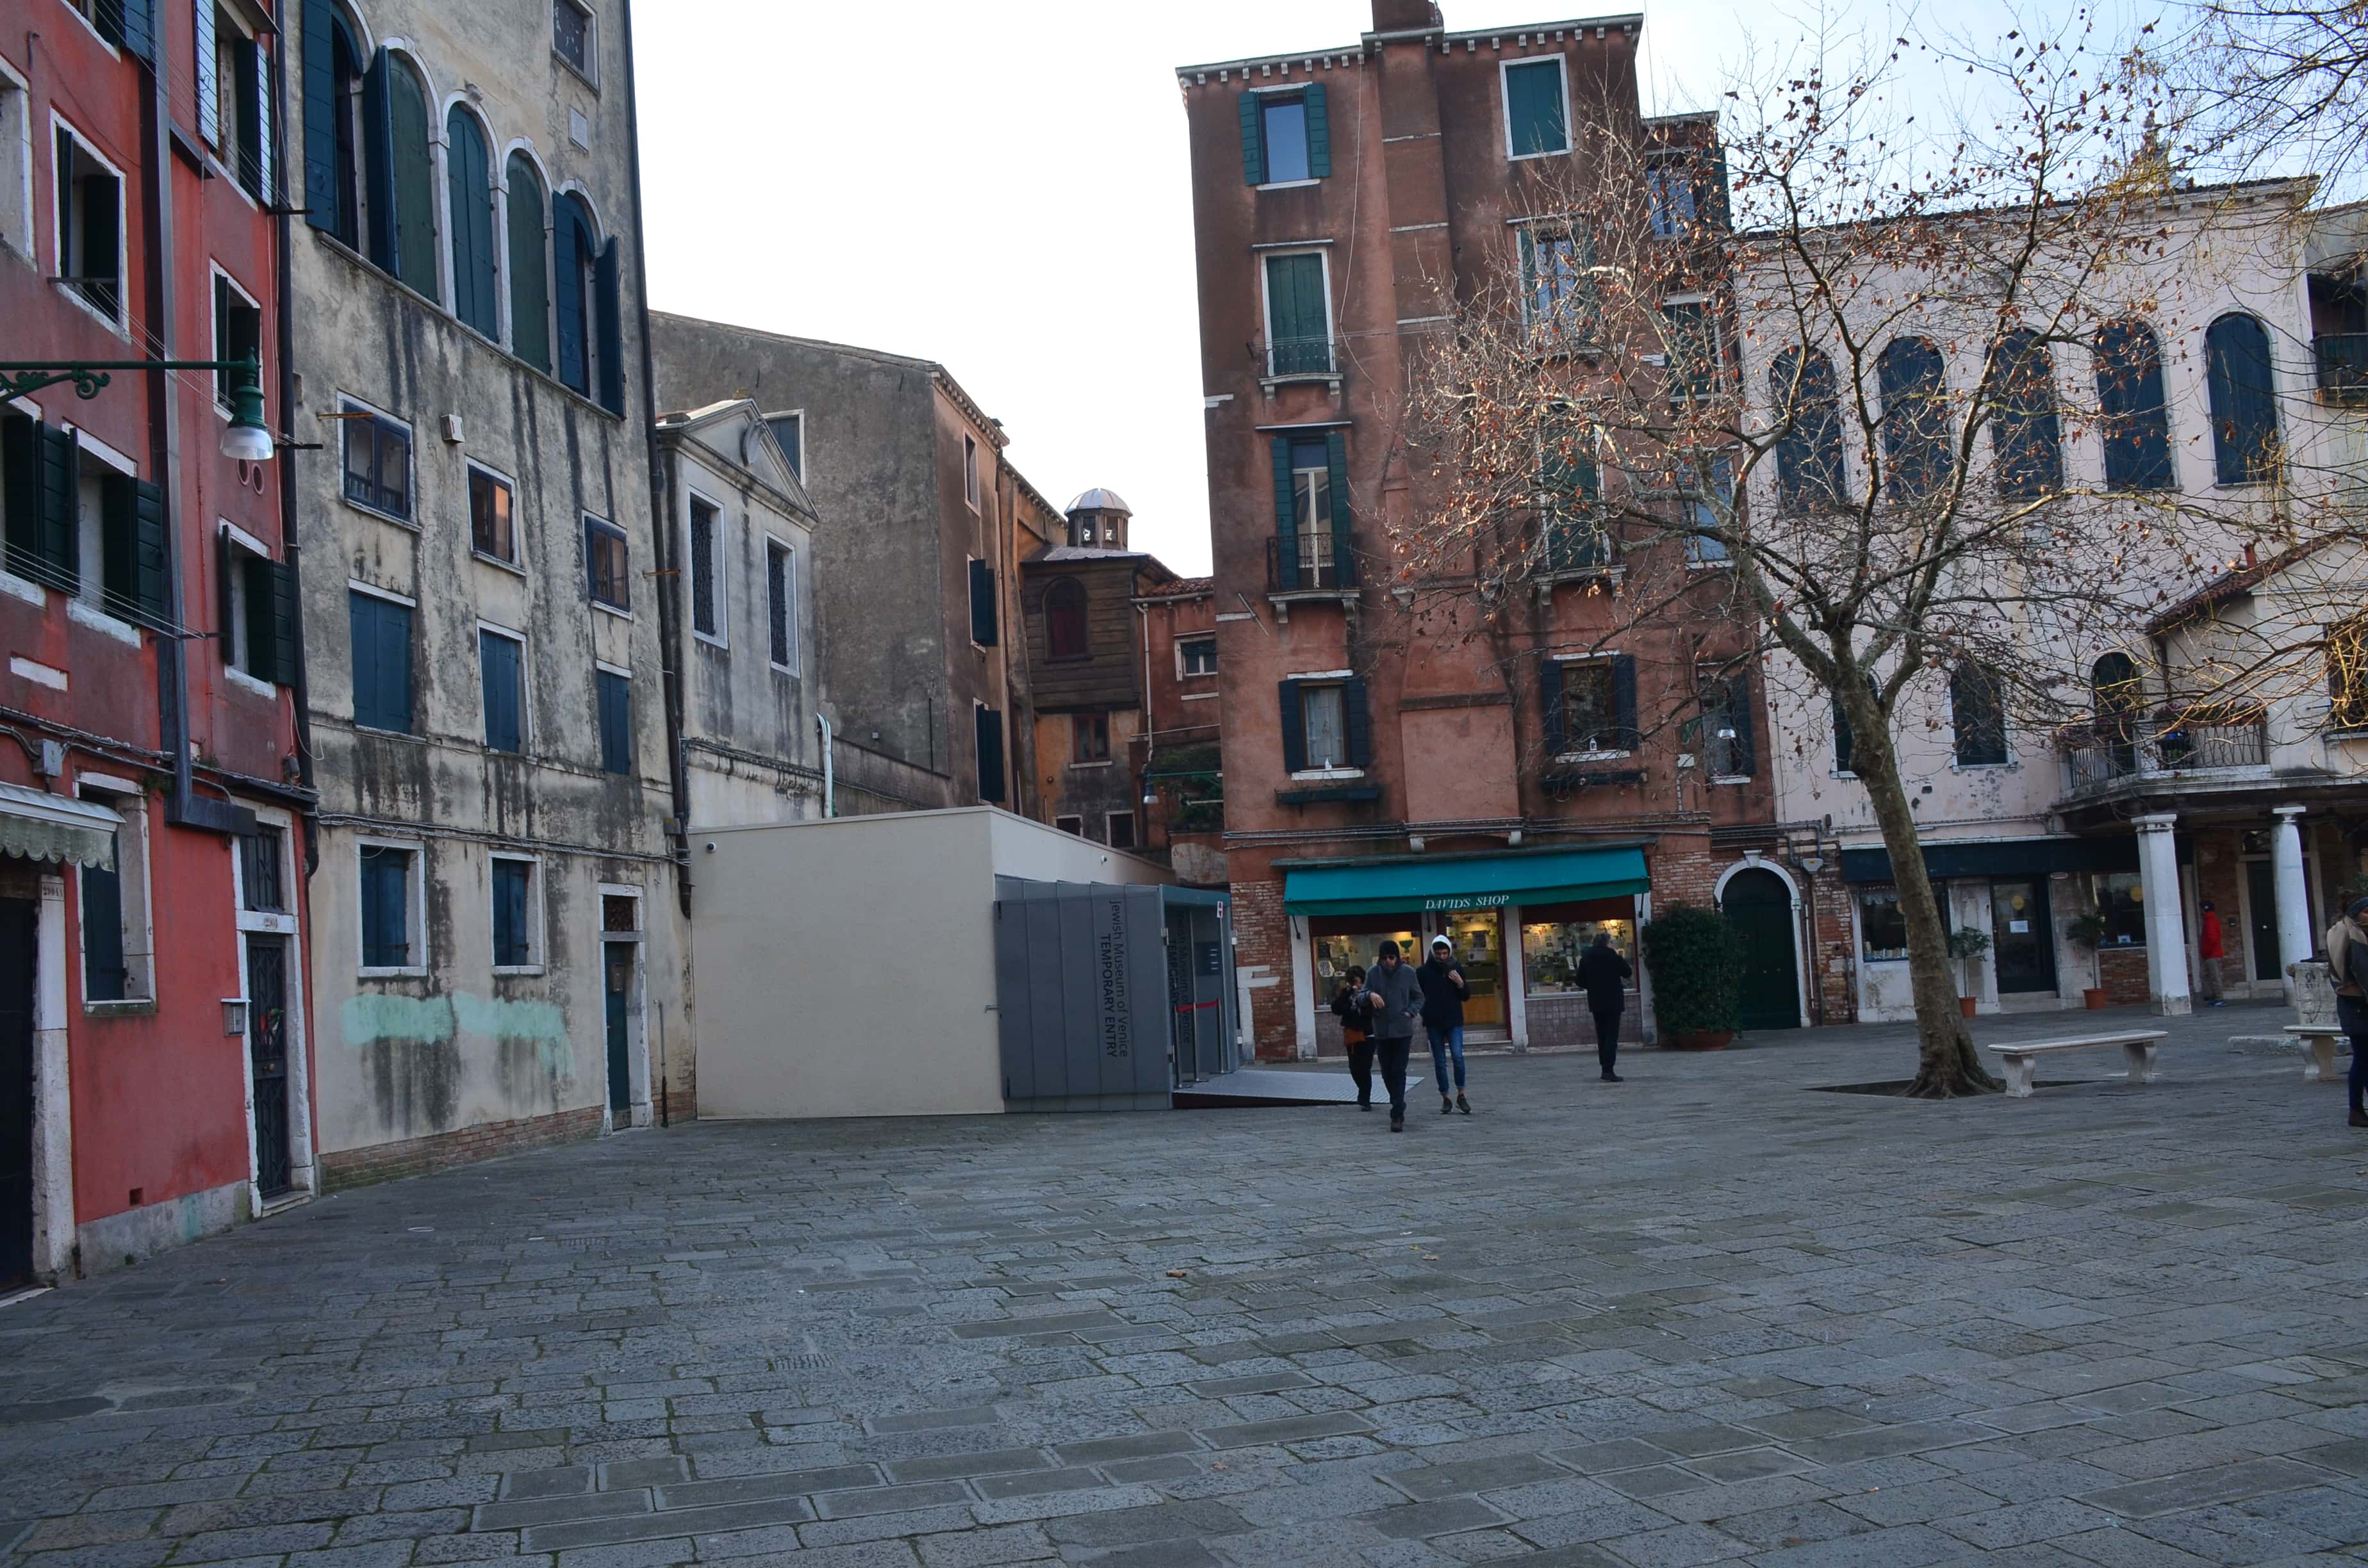 Entrance to the Jewish Museum (left) in Venice, Italy